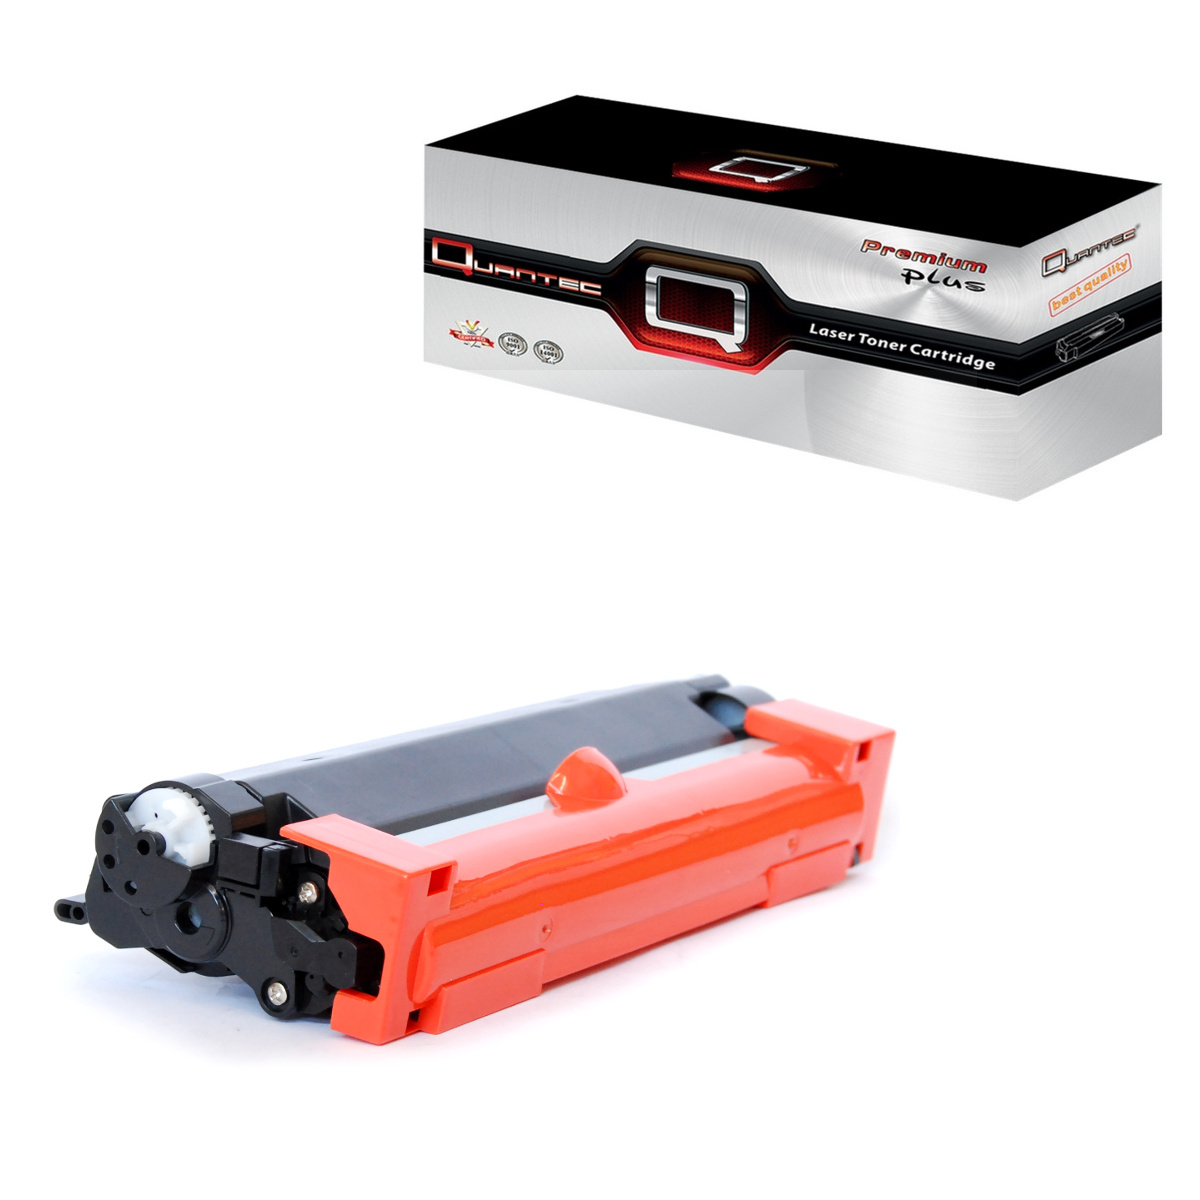  TN2410 Toner Cartridge Compatible for Brother TN-2410 Toner for  Brother DCP-L2530DW DCP-L2510D MFC-L2710DW HL-L2350DW HL-L2310D DCP-L2510D  Printers, 1 Pack : Office Products